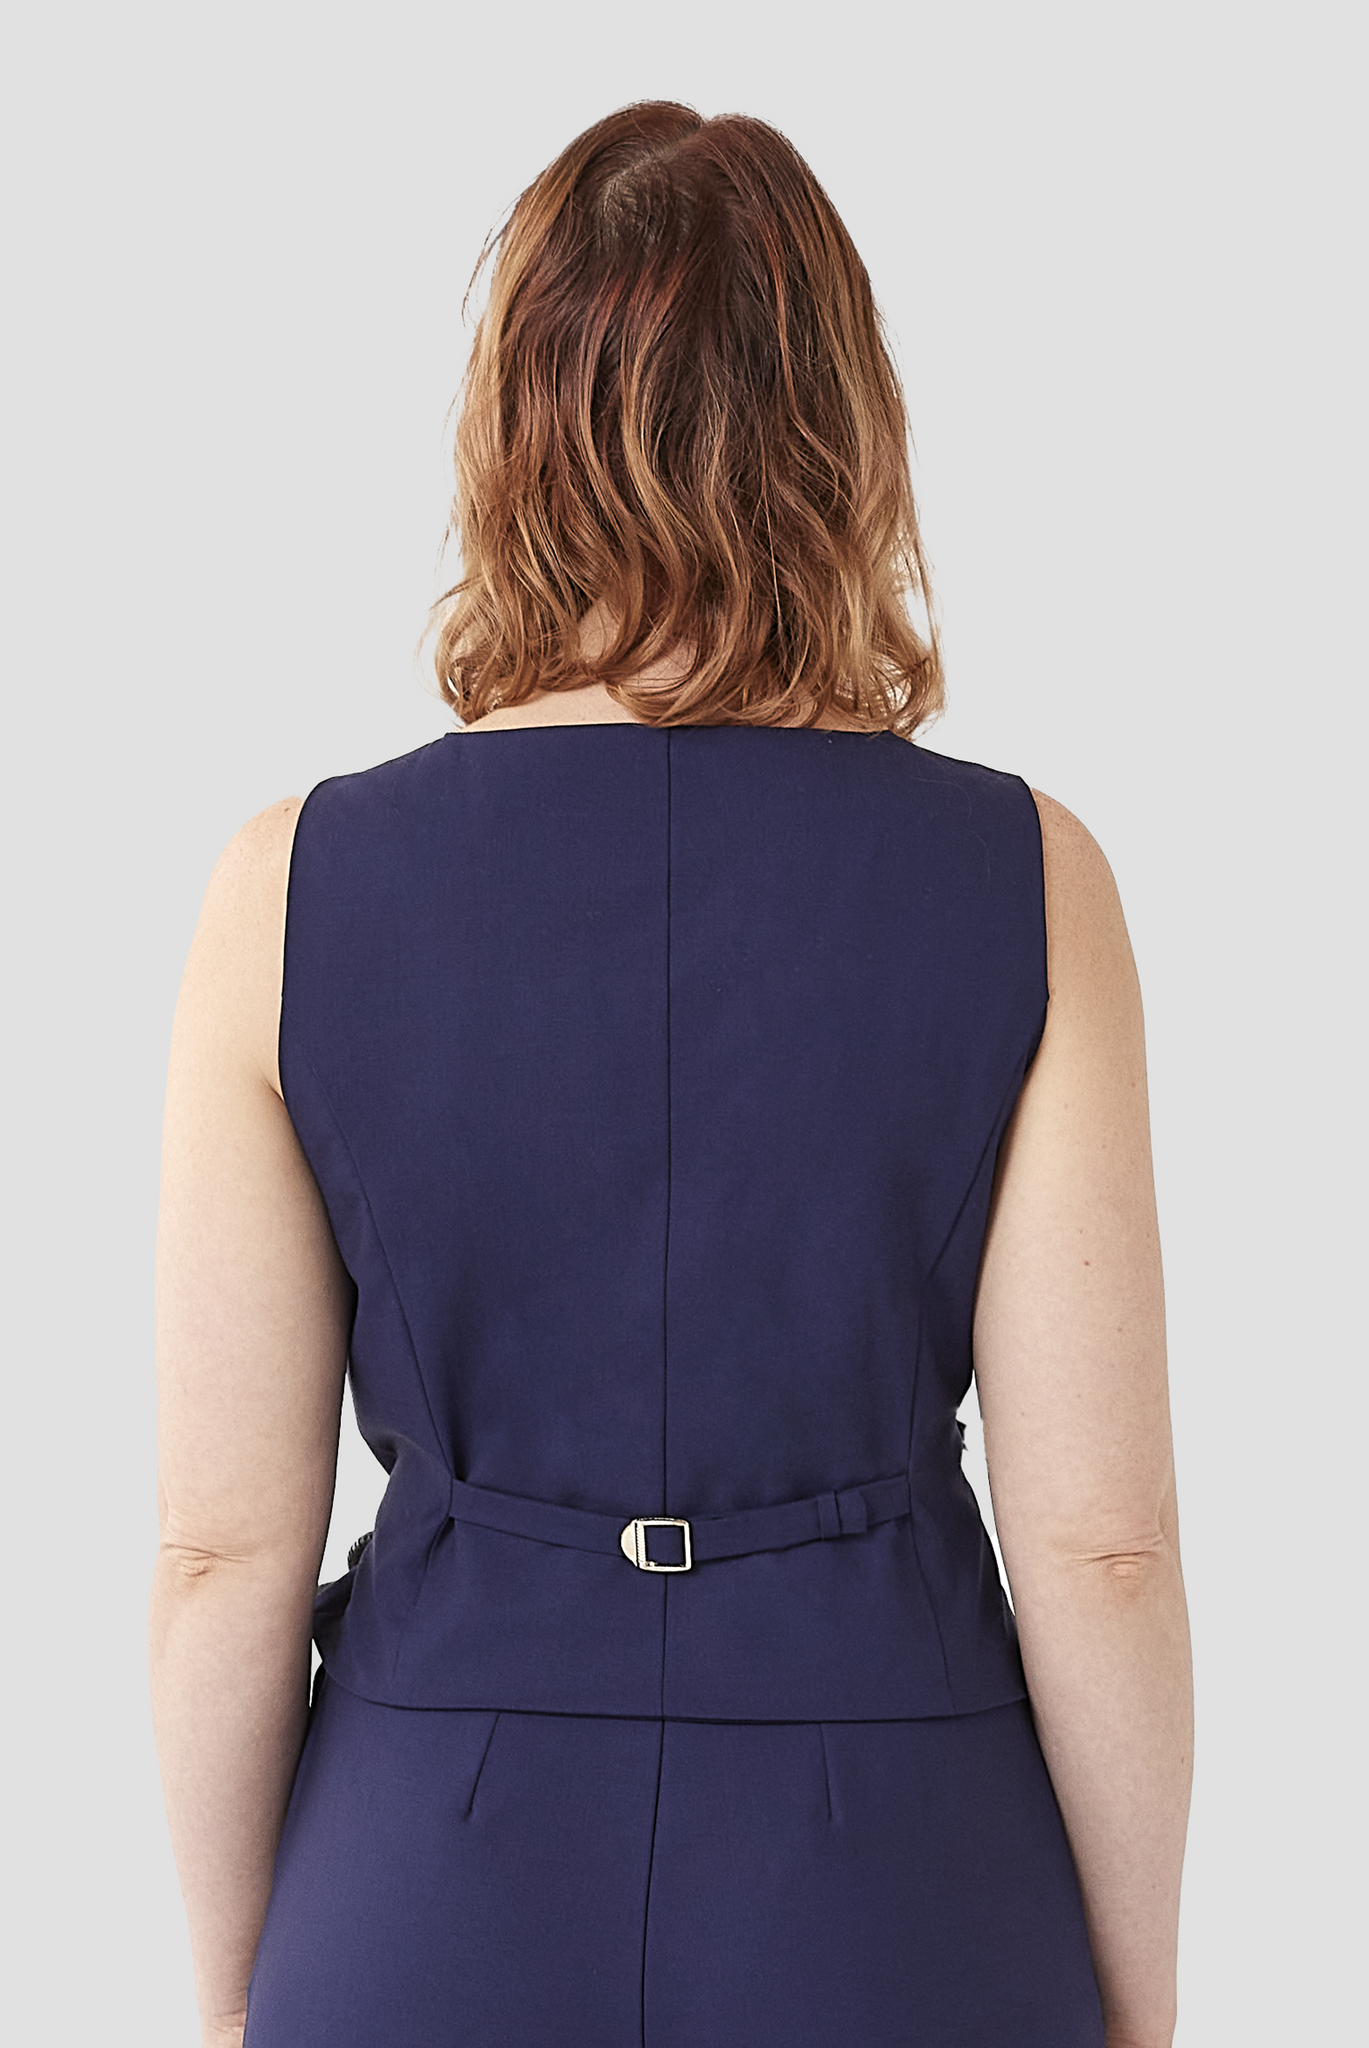 The Wool Vest by Aam comes with an adjustable back strap to cinch the waist for a just-right fit.